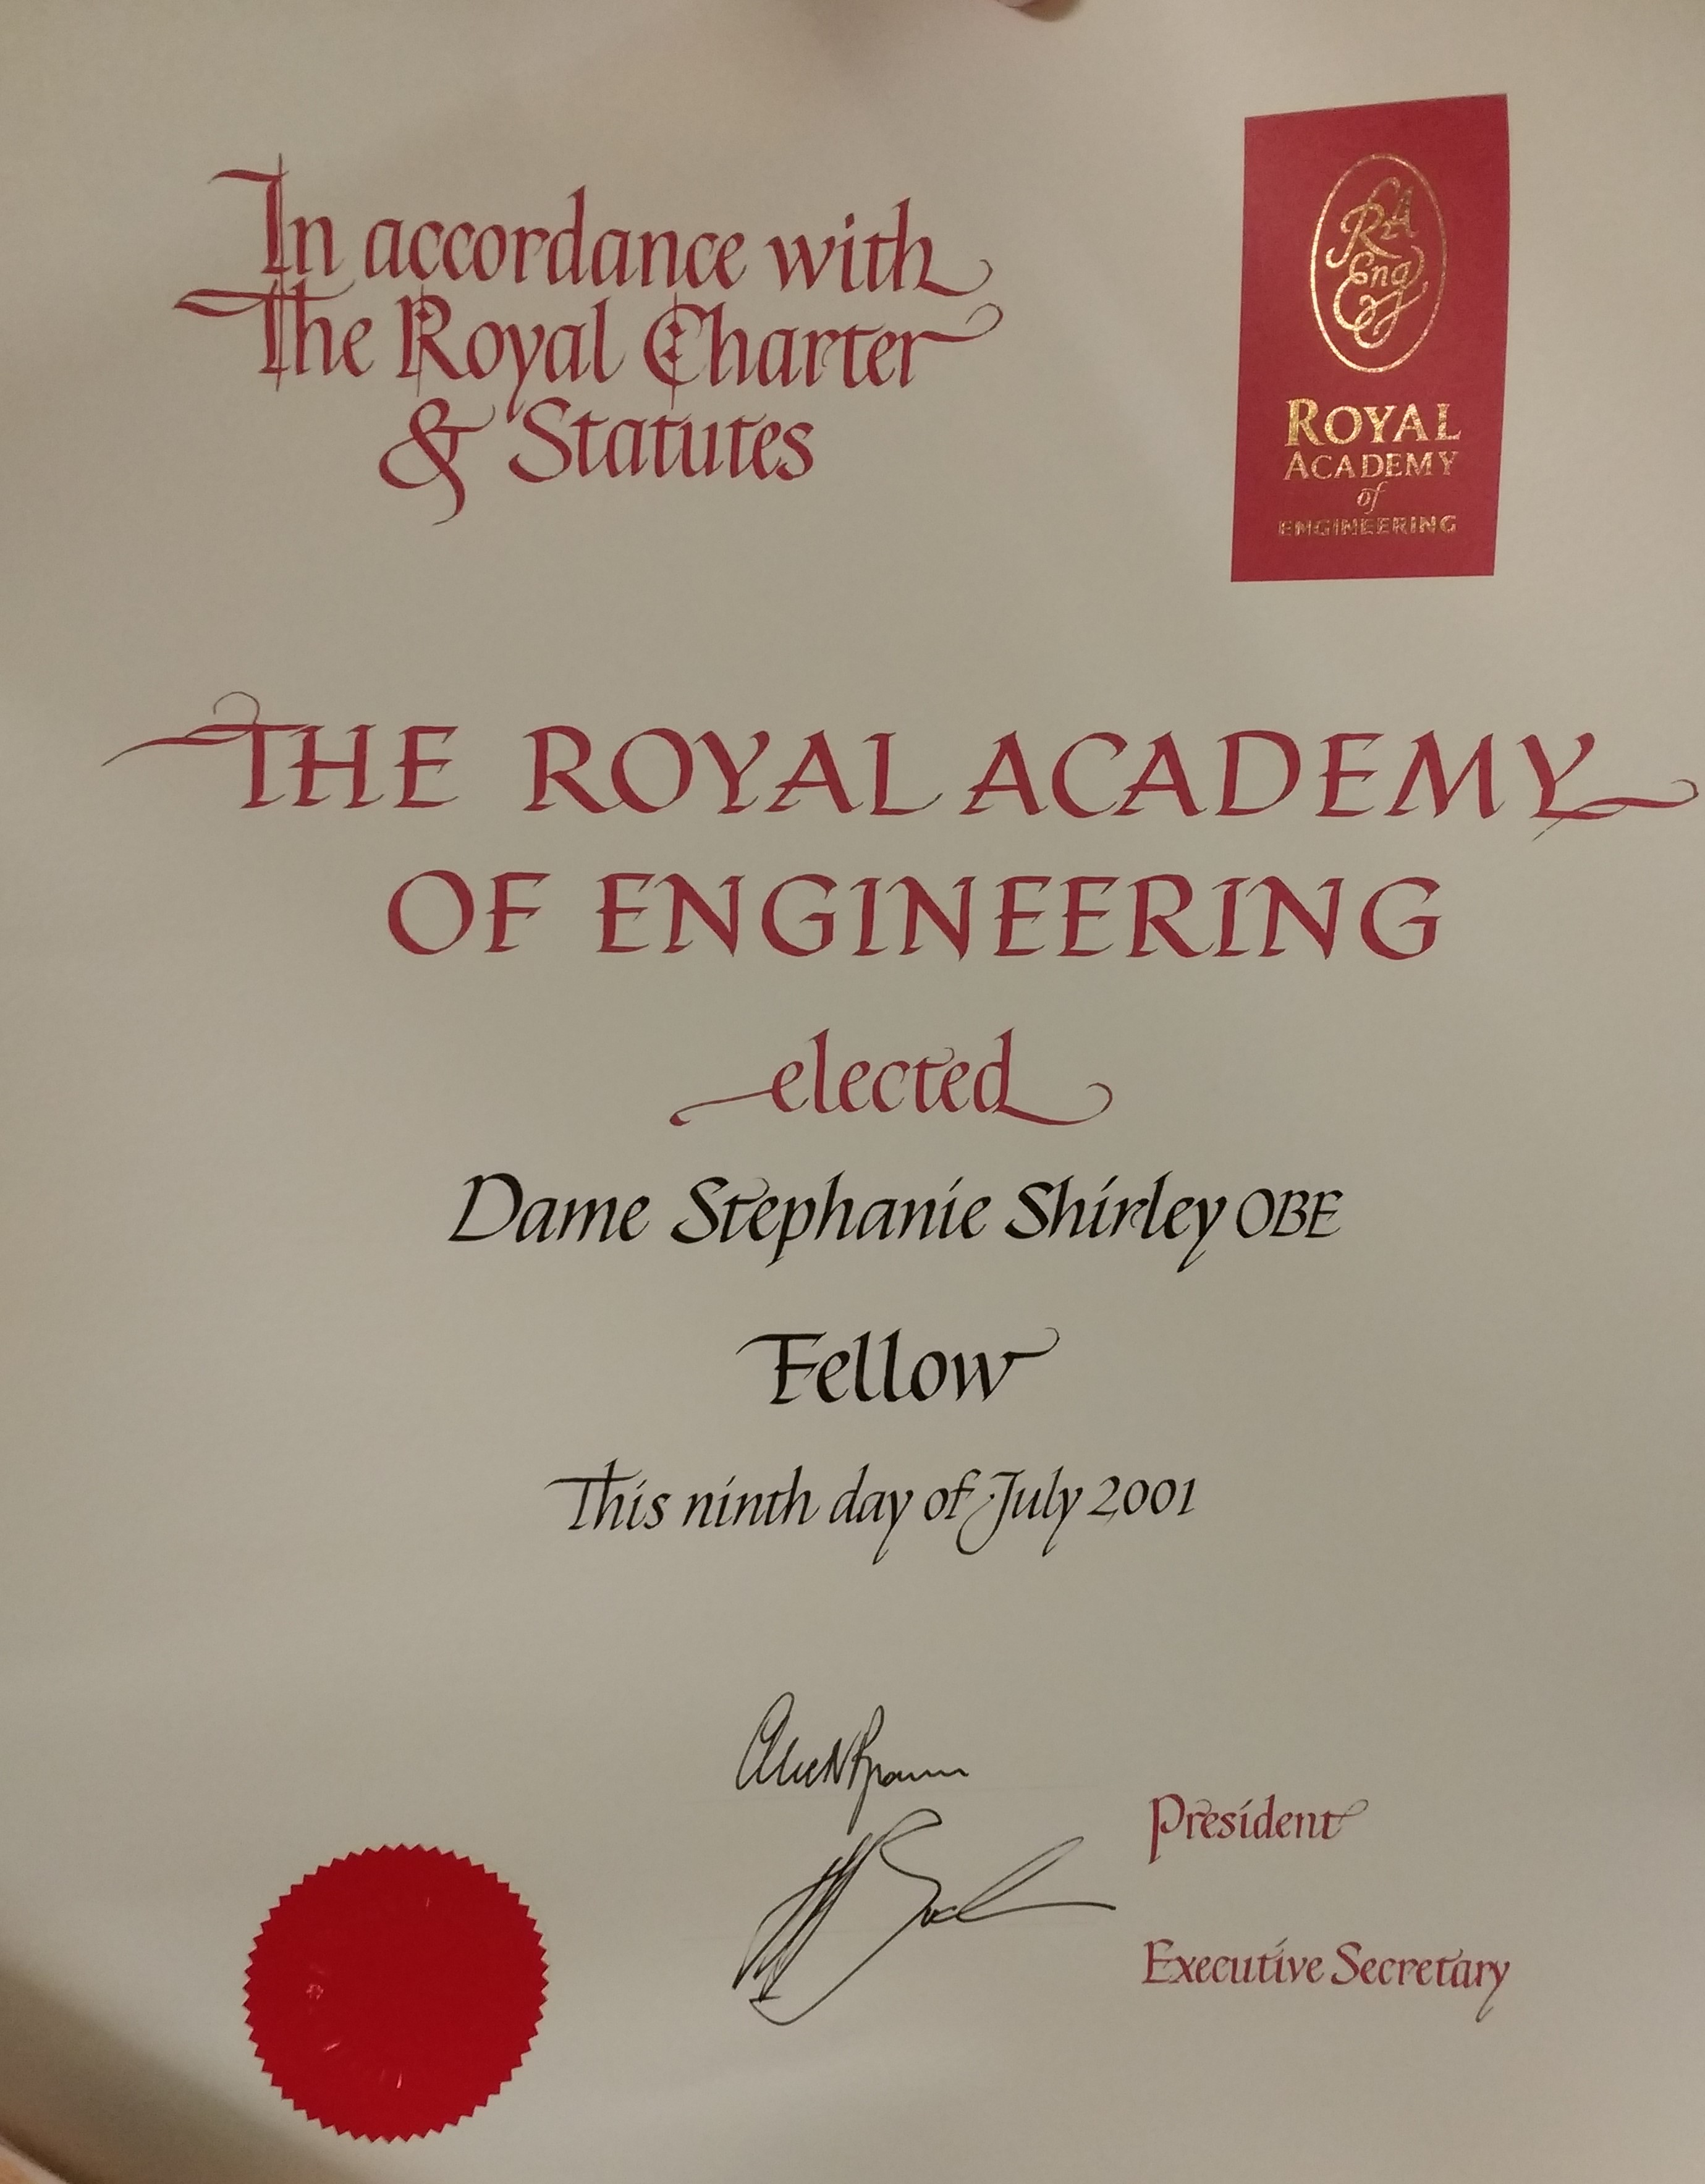 Certificate on cream paper with red and black lettering which reads "In accordance with the Royal Charter and Statutes The Royal Academy of Engineering elected Dame Stephanie Shirley OBE Fellow this ninth day of July 2001"